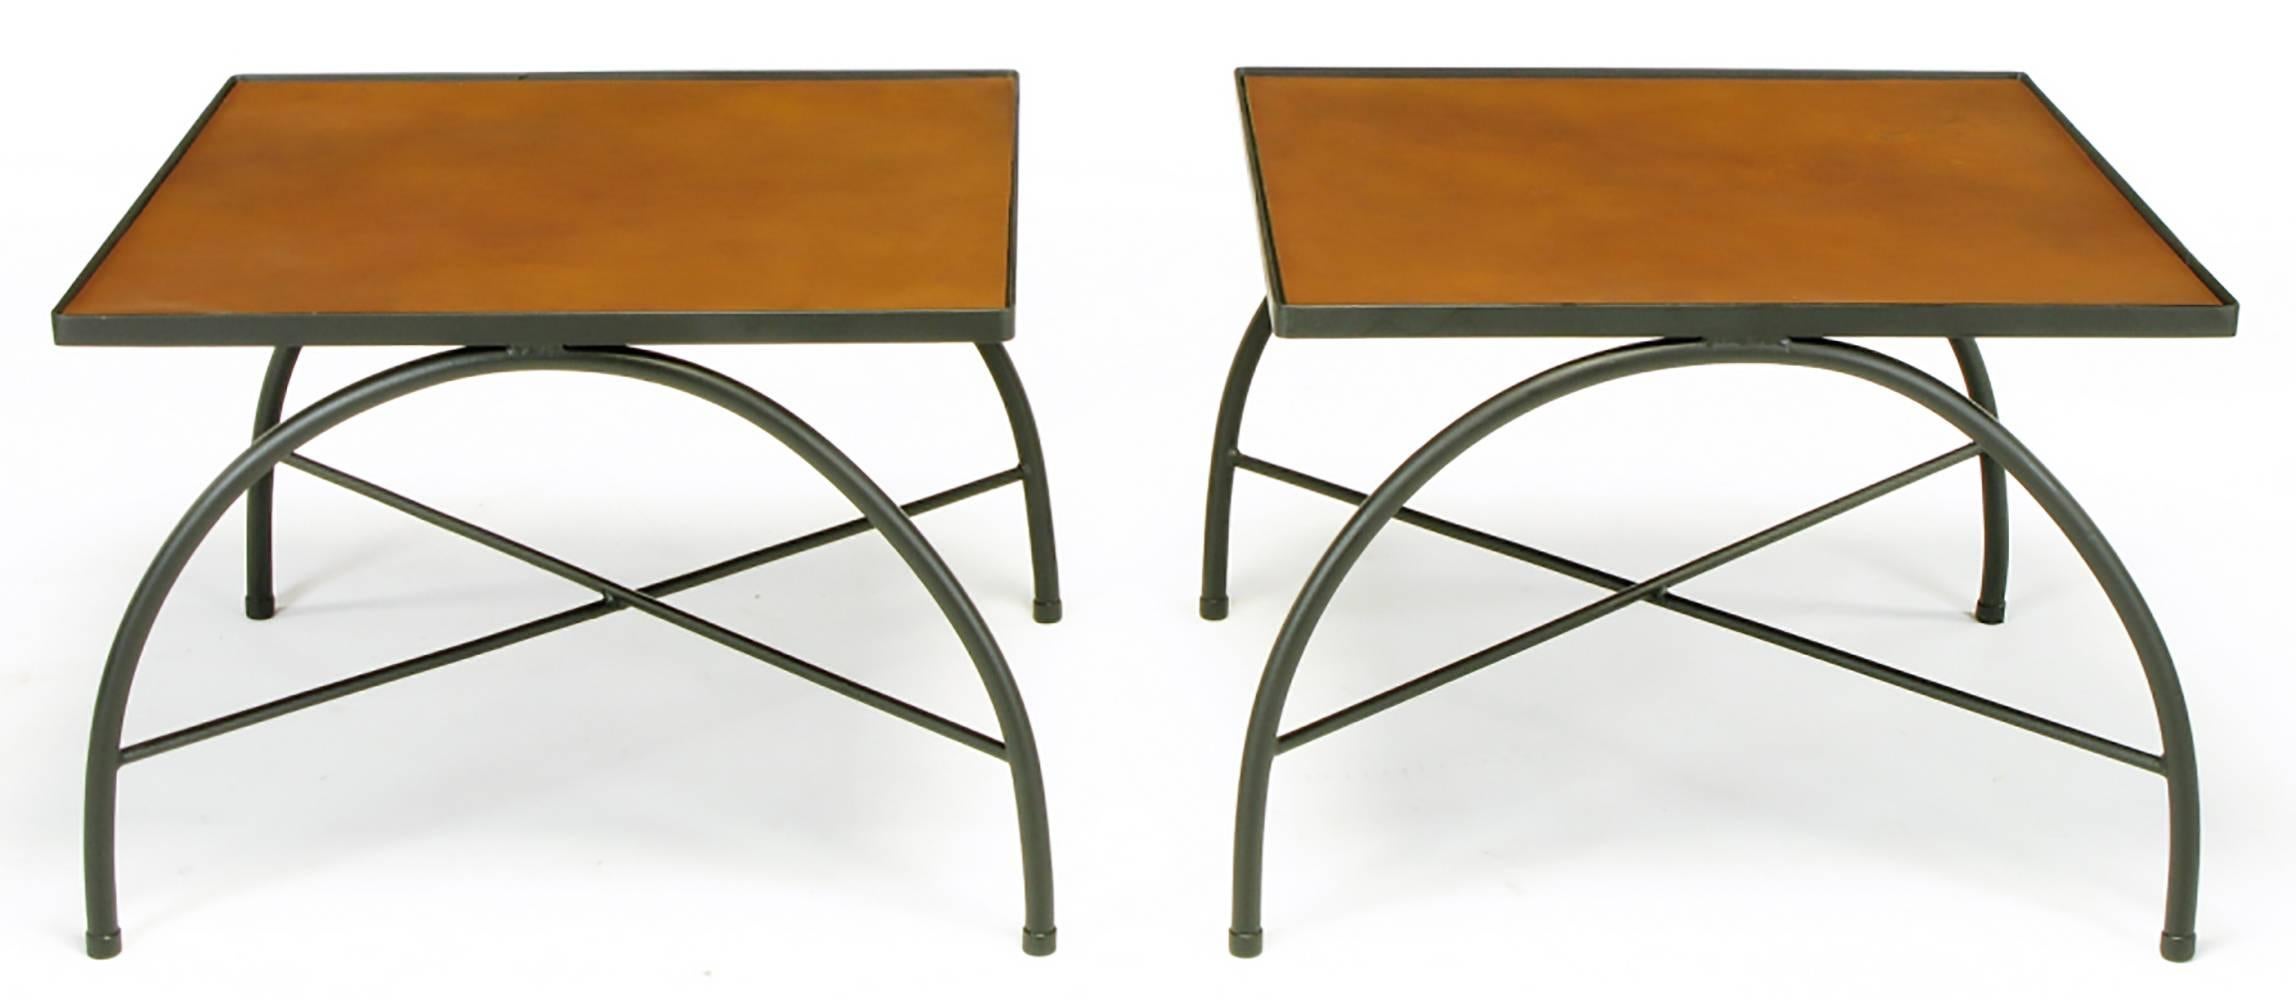 Pair of custom wrought iron side tables with X-stretcher bases and curule legs in the style of Jacques Adnet. Square top has a leather covered Masonite board inladed into a wrought iron frame. Custom-made for a Chicago area estate in 1966. Two pair